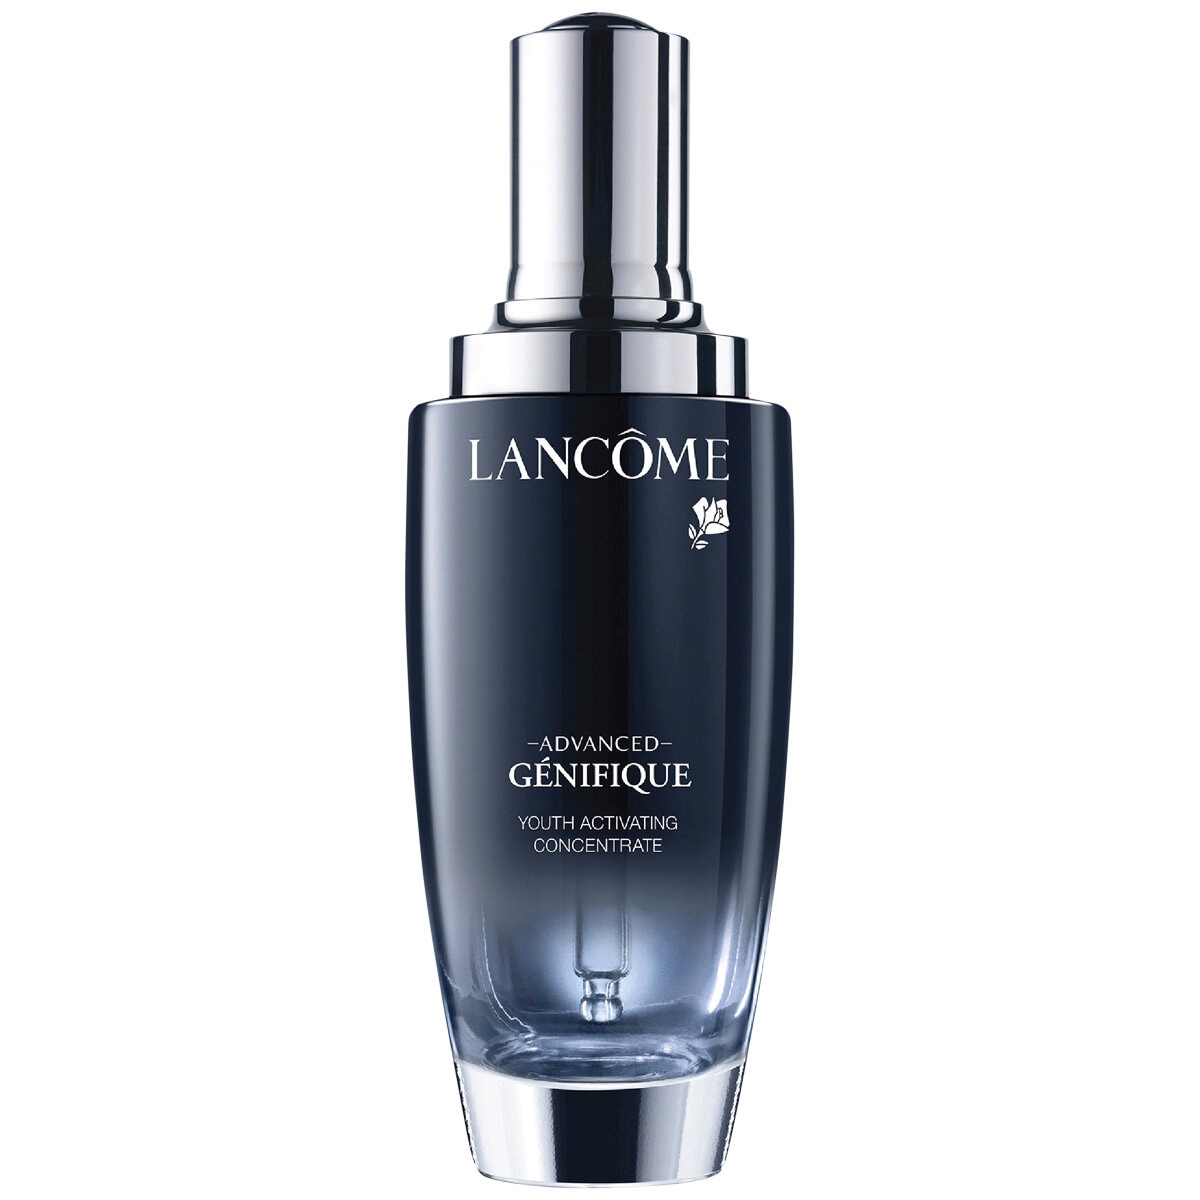 Lancome Advanced Genifique Youth Activating Concentrate 1...